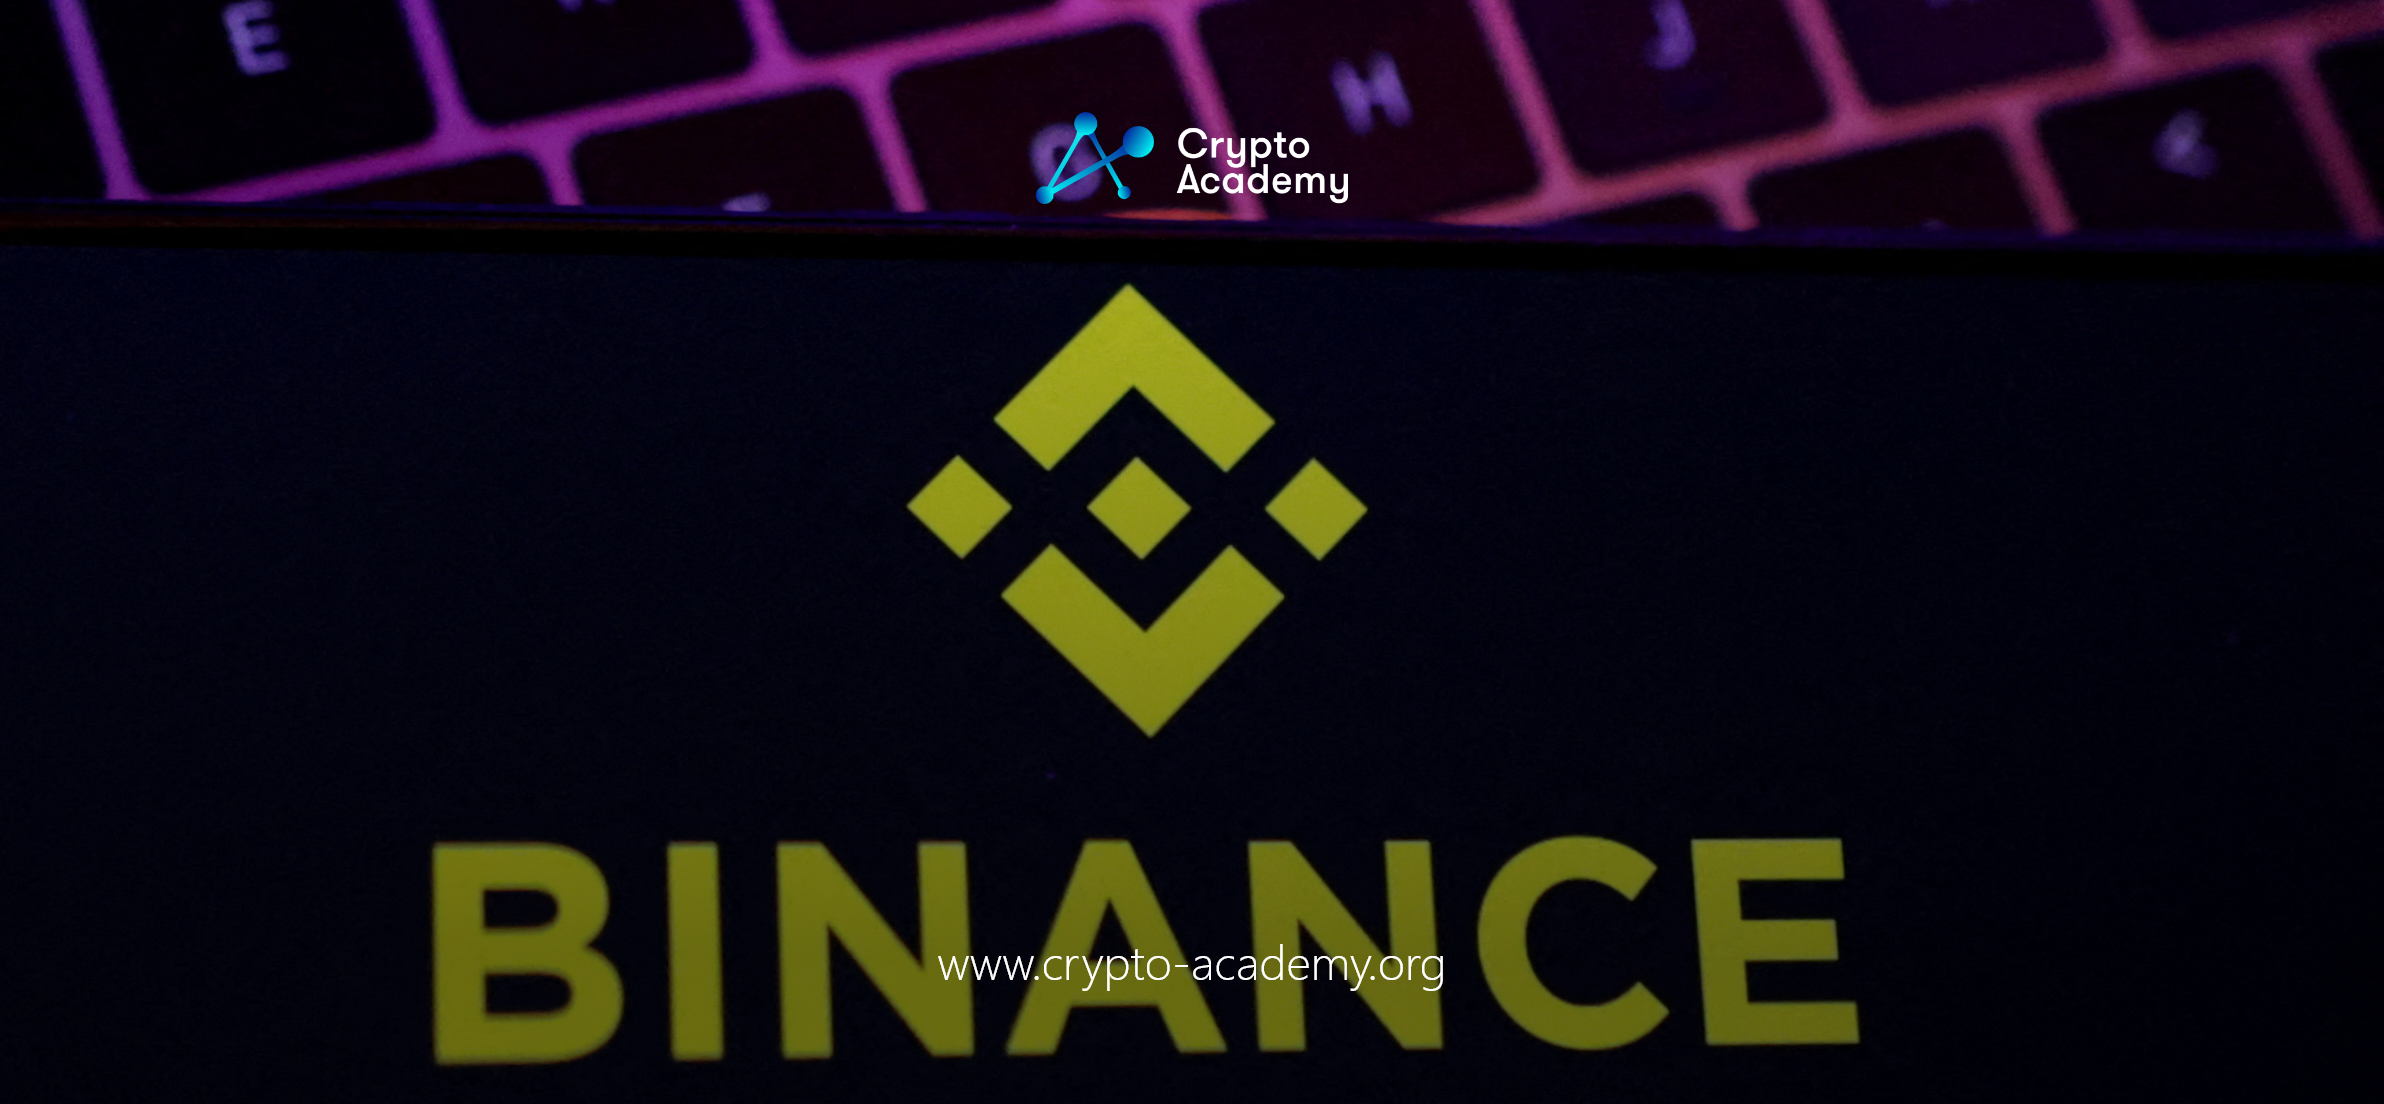 Detained Binance Executives Sue Nigerian Government